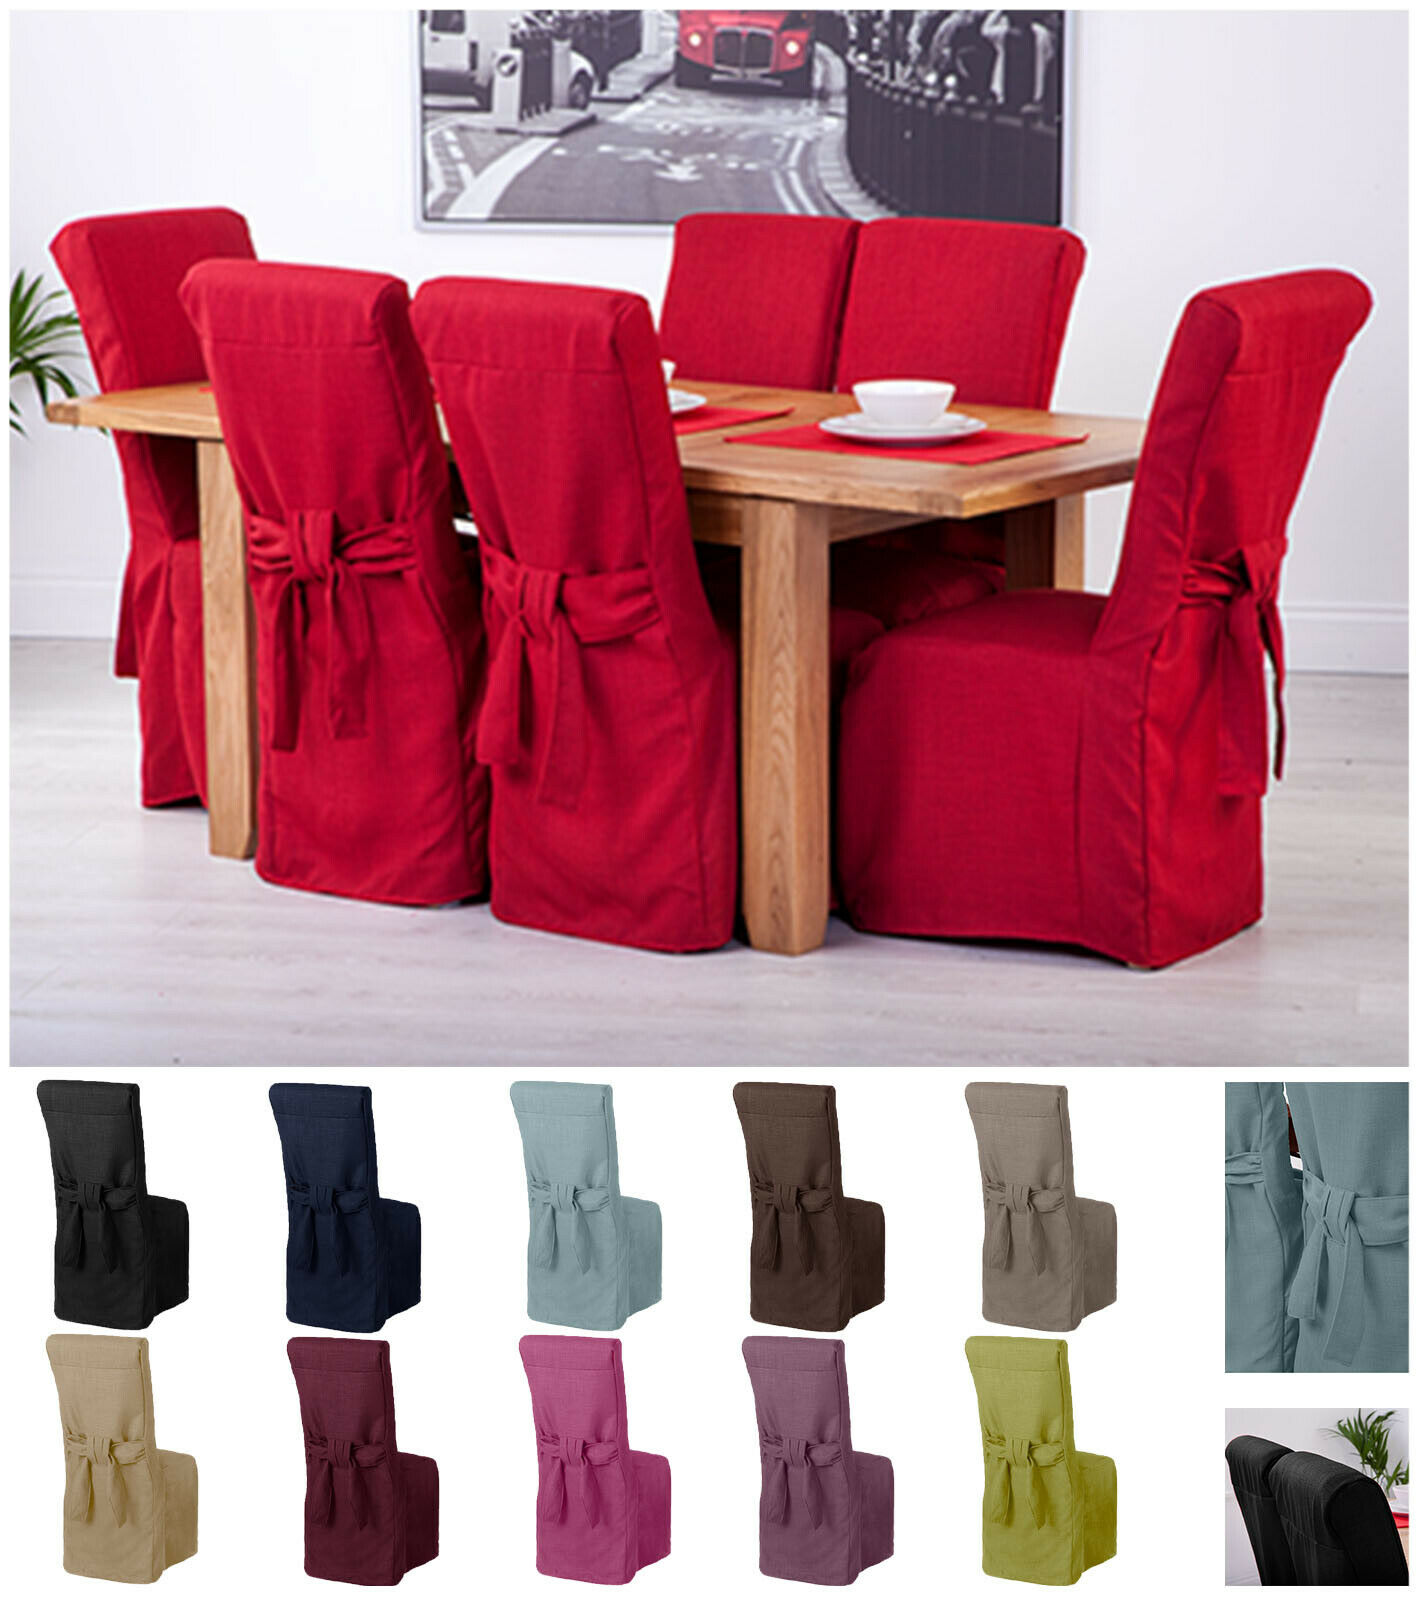 Fabric Dining Chair Covers Free, Fabric Dining Chair Covers Uk